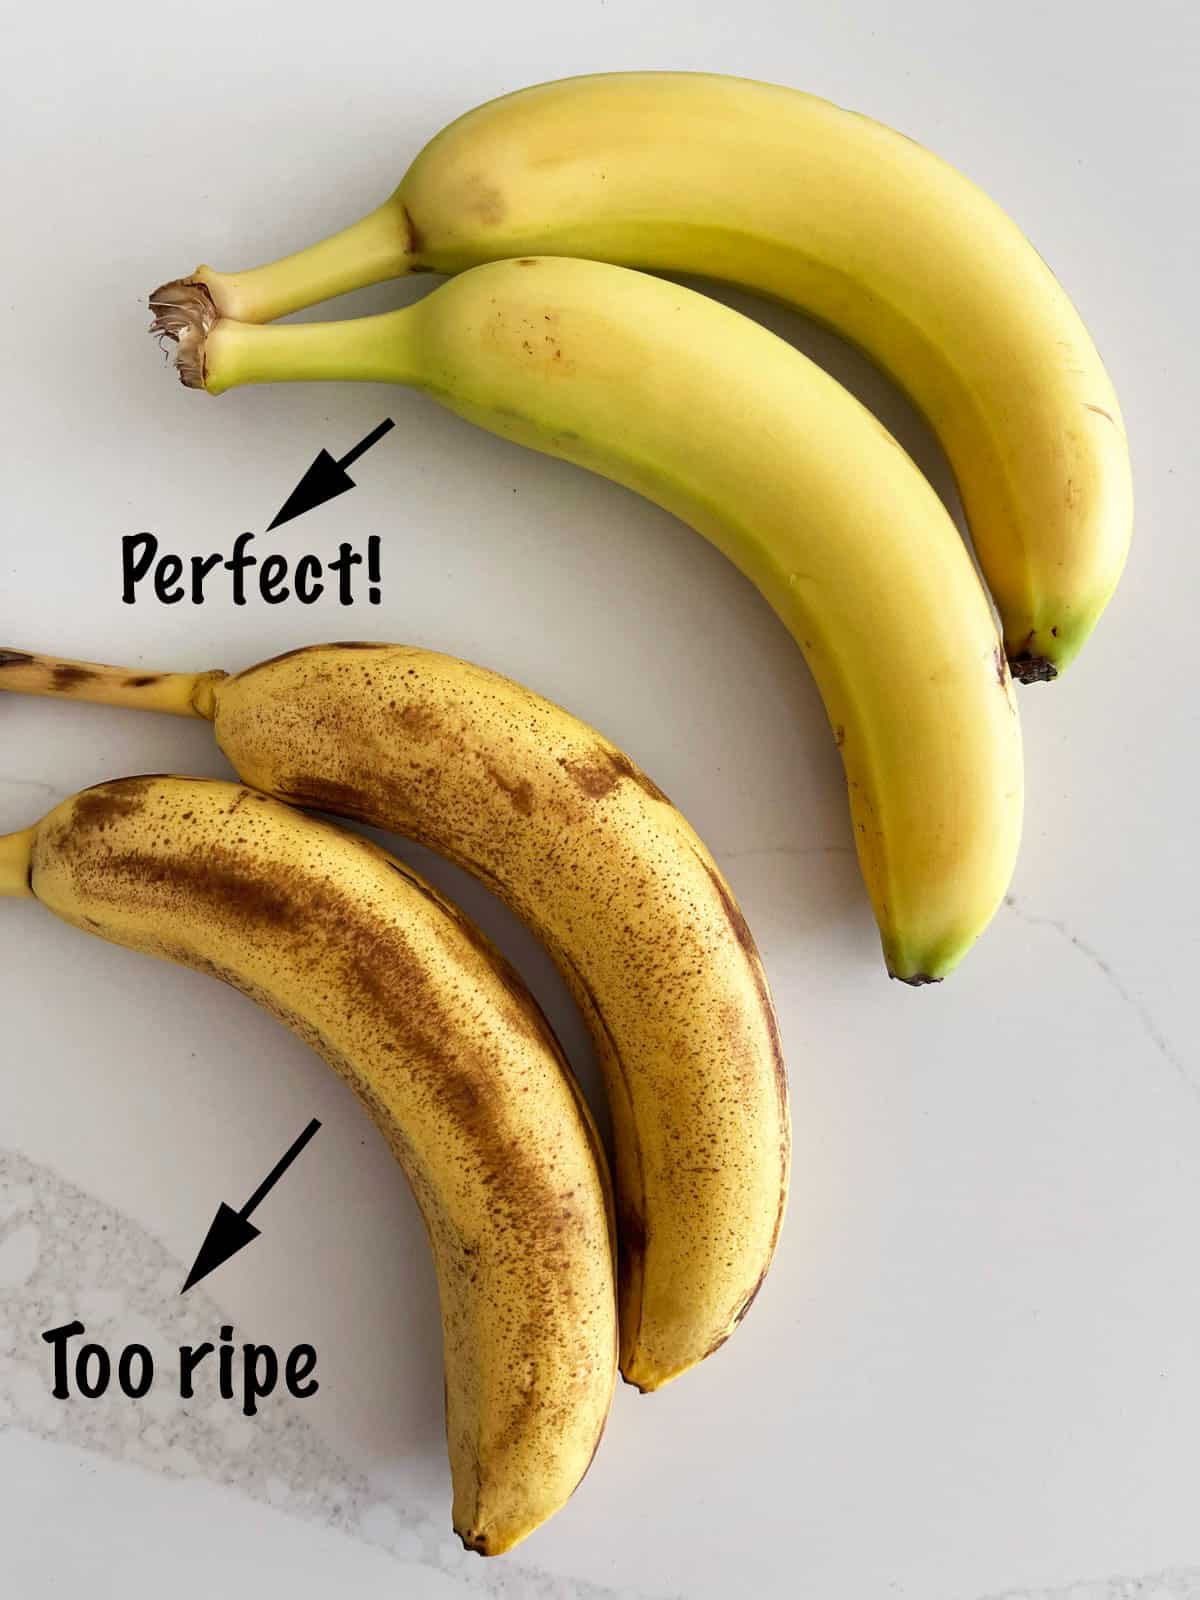 Two bananas that are too ripe to fry and two that are perfect for frying. 